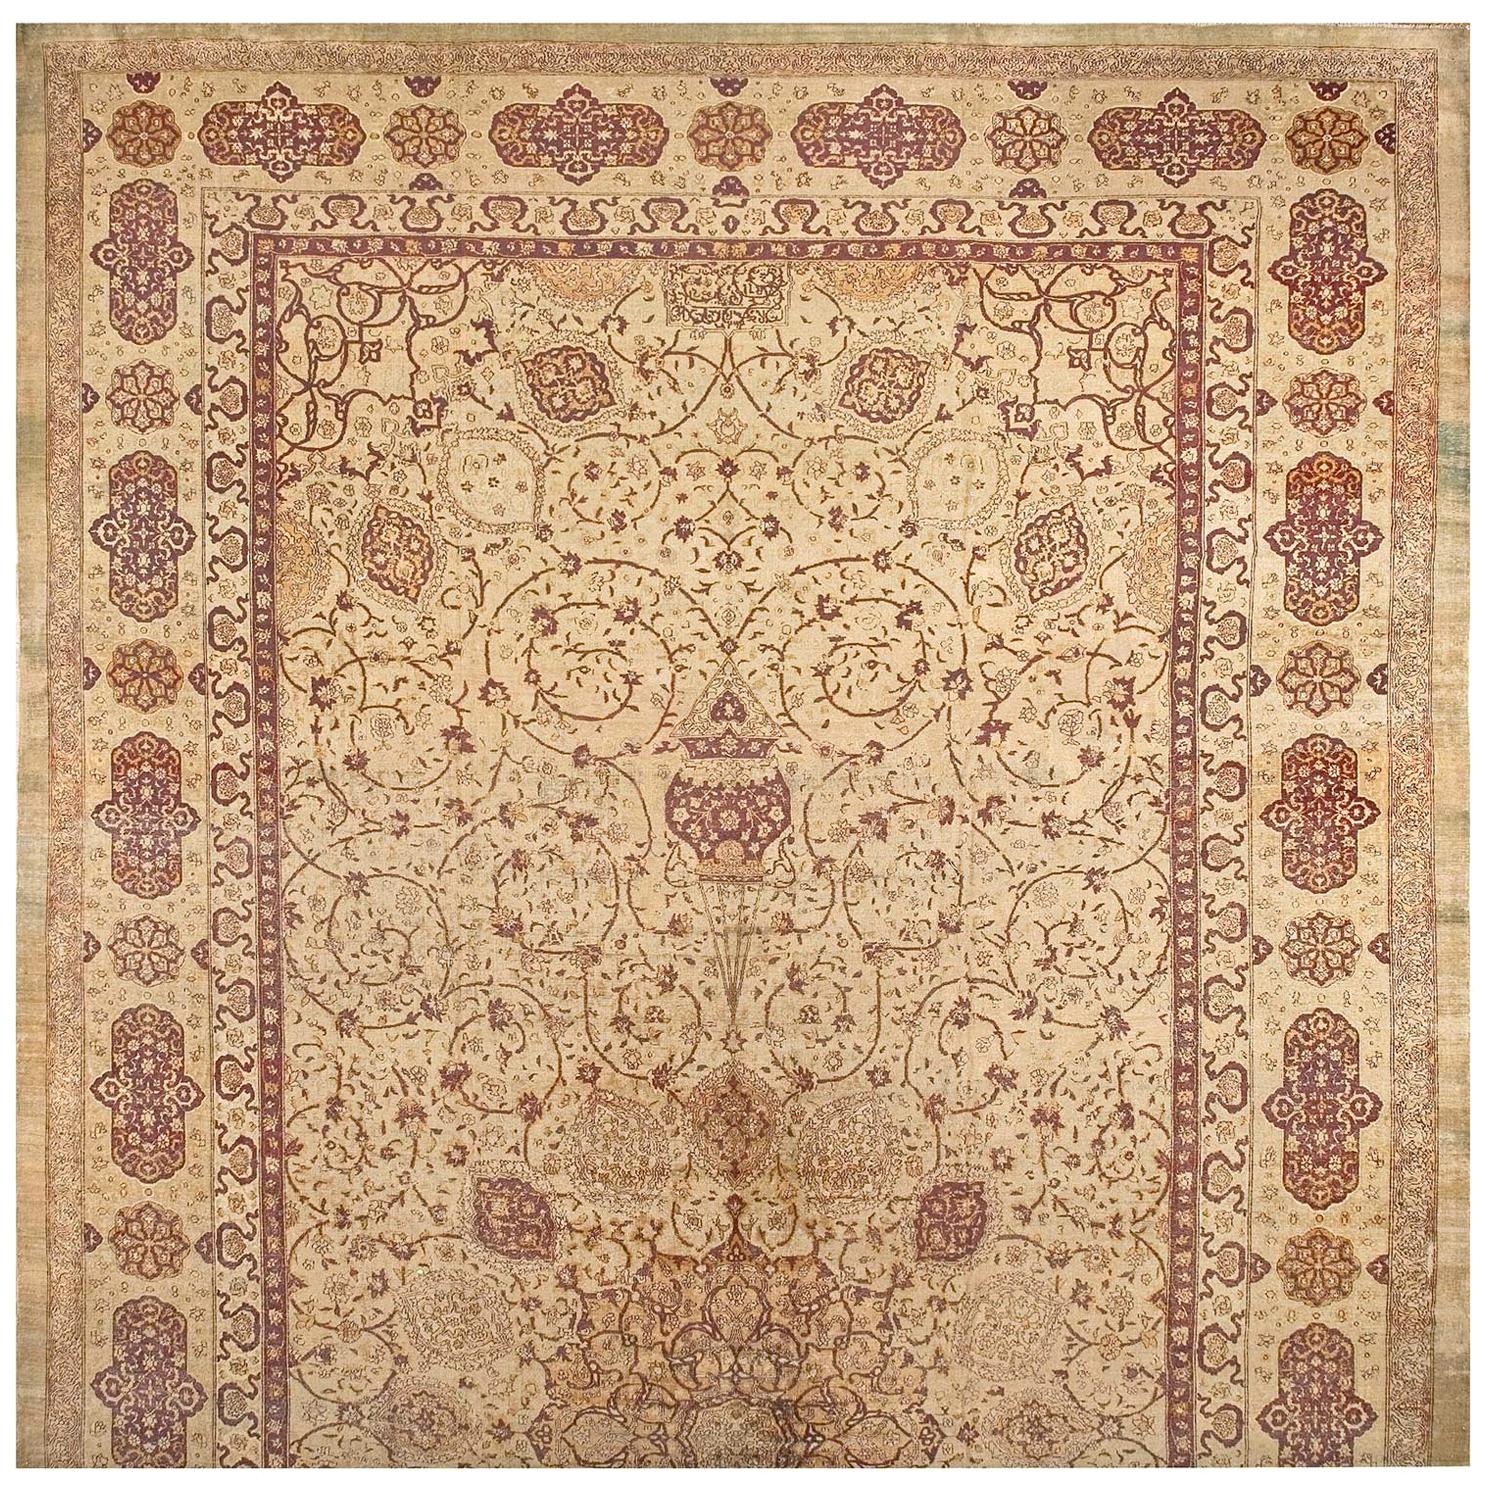 Early 20th Century N. Amritsar Carpet ( 14 x 27' - 427 x 823 ) For Sale